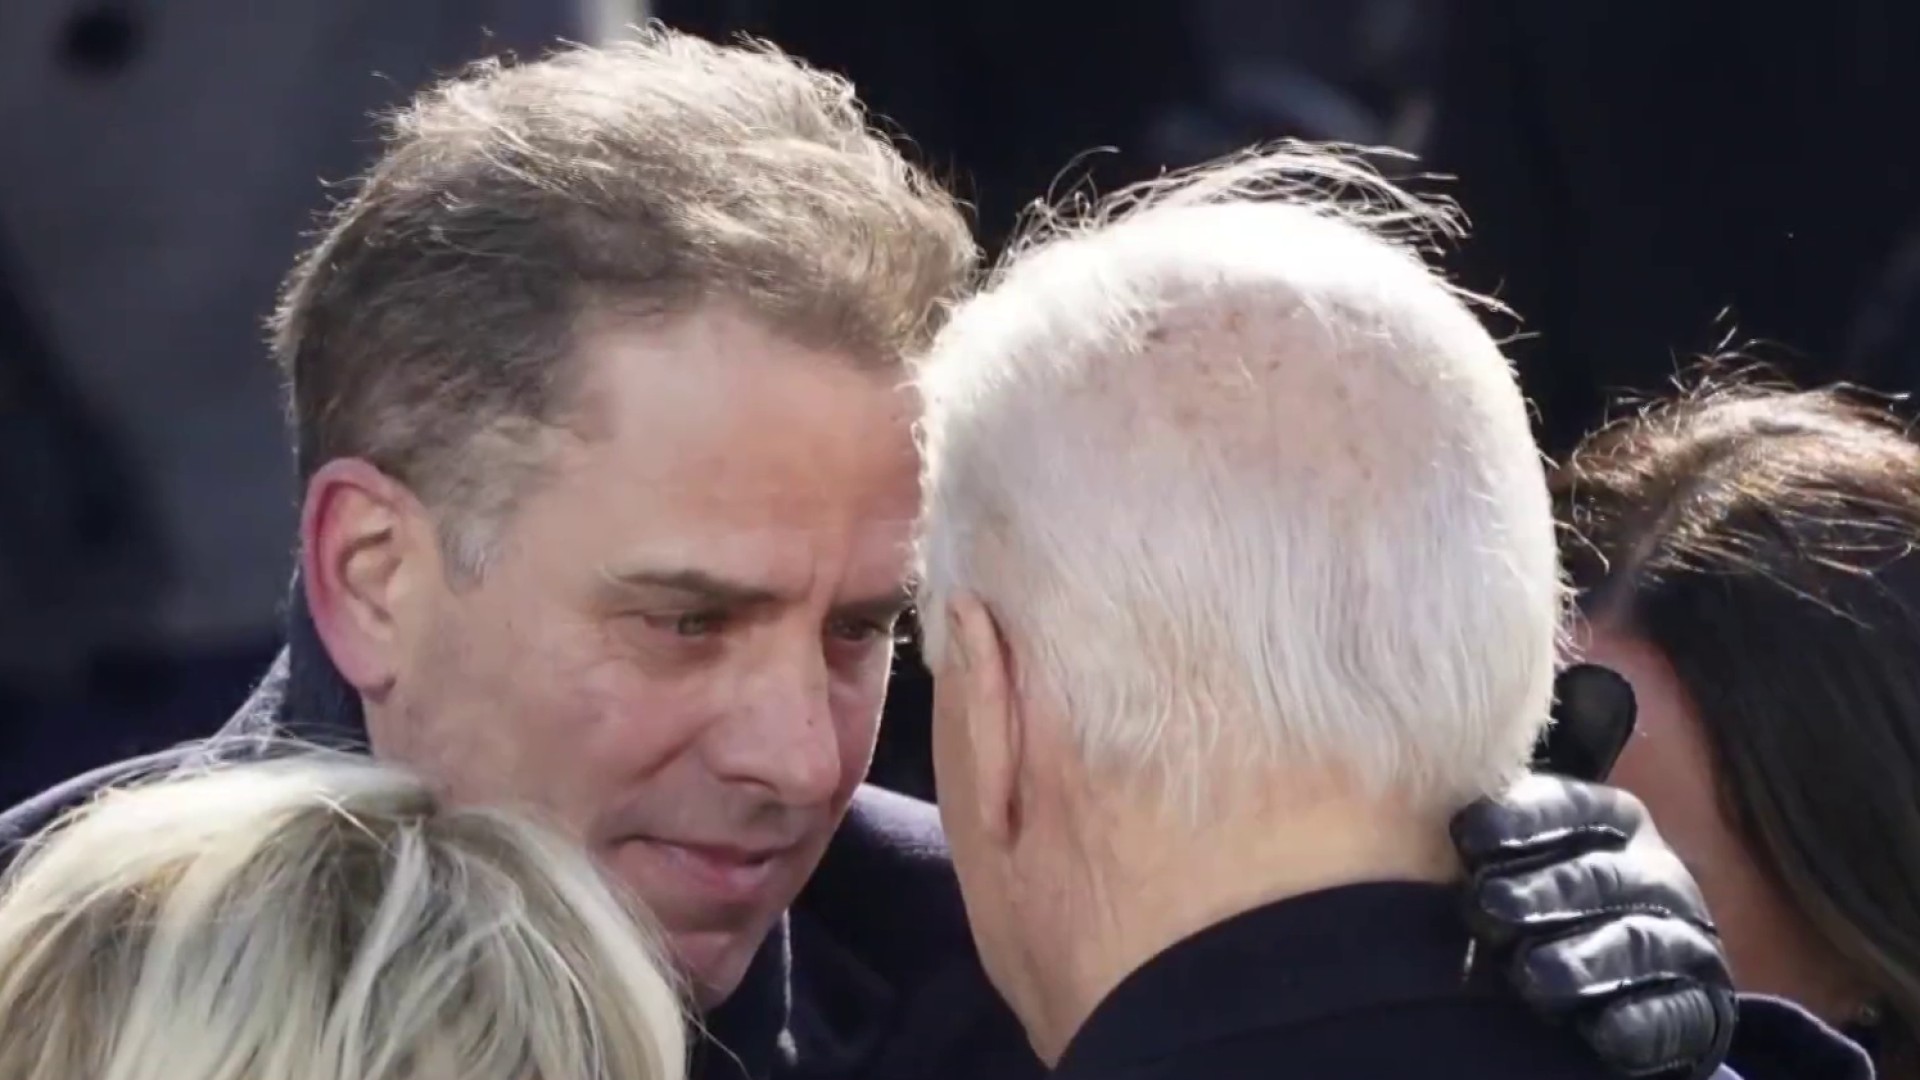 Why gun charges are being brought against Hunter Biden now